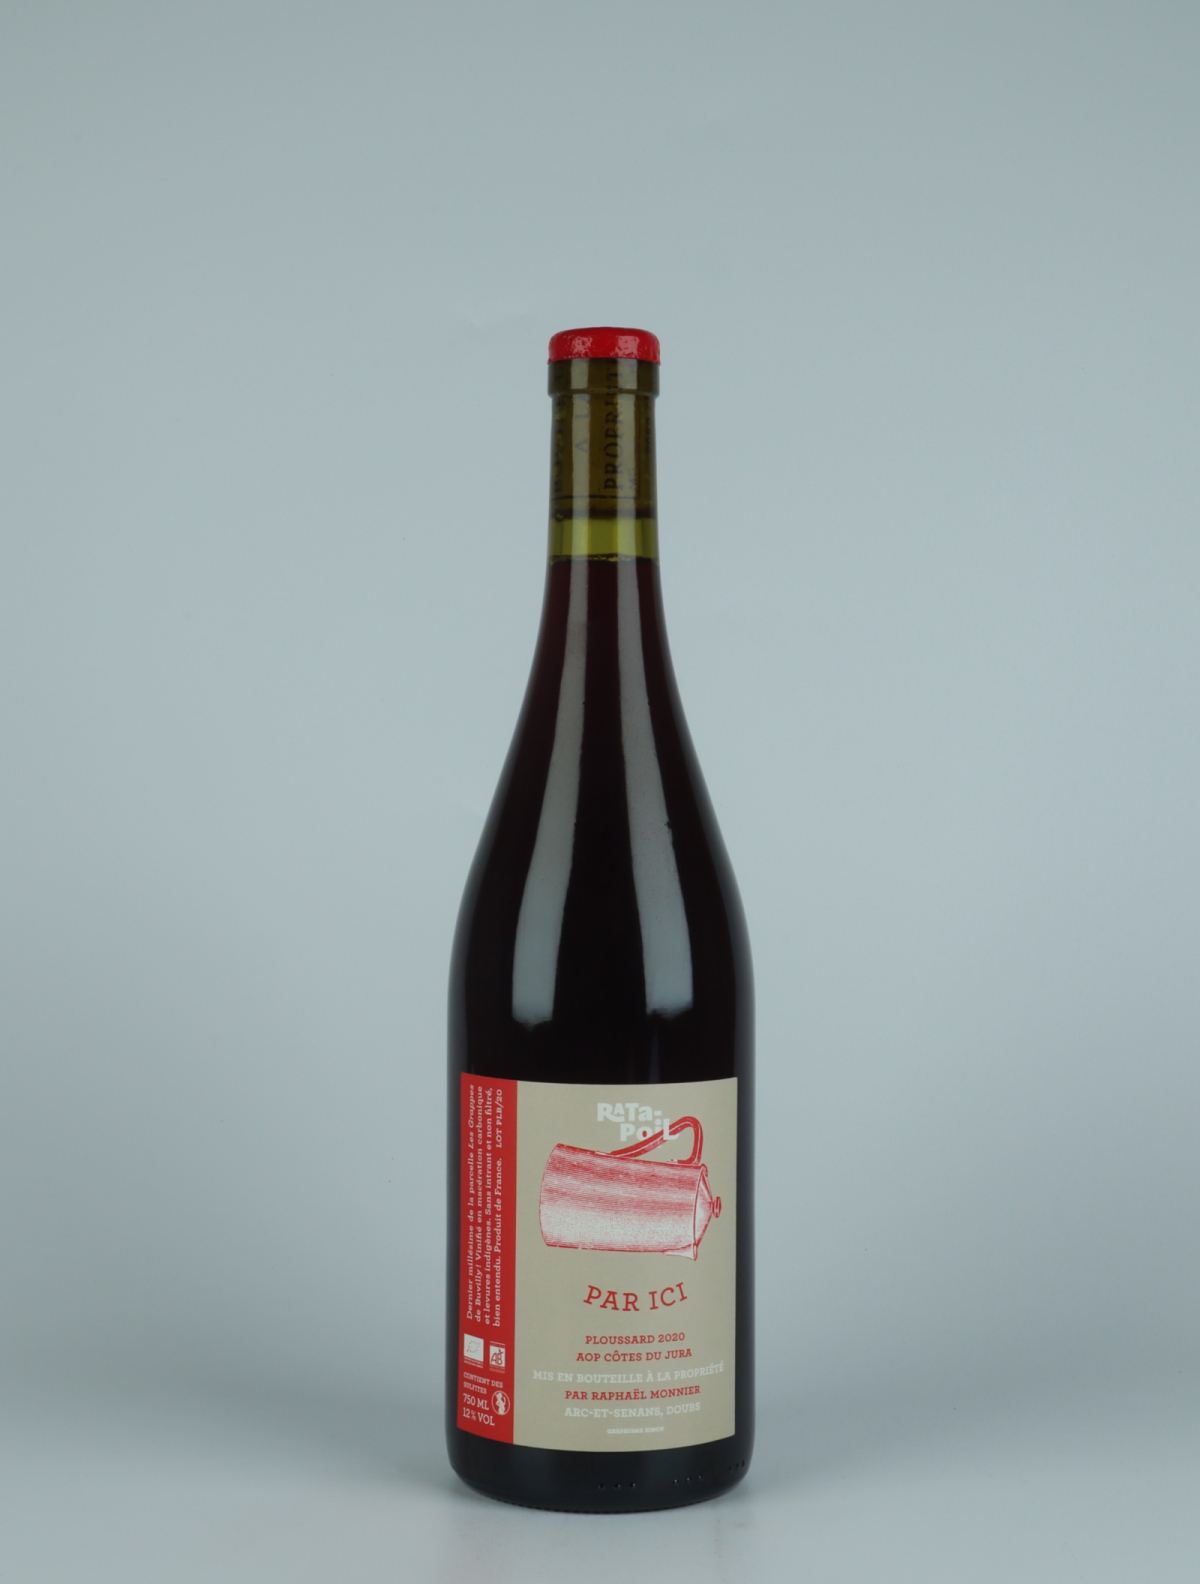 A bottle 2020 Par Ici - Ploussard Red wine from Domaine Ratapoil, Jura in France